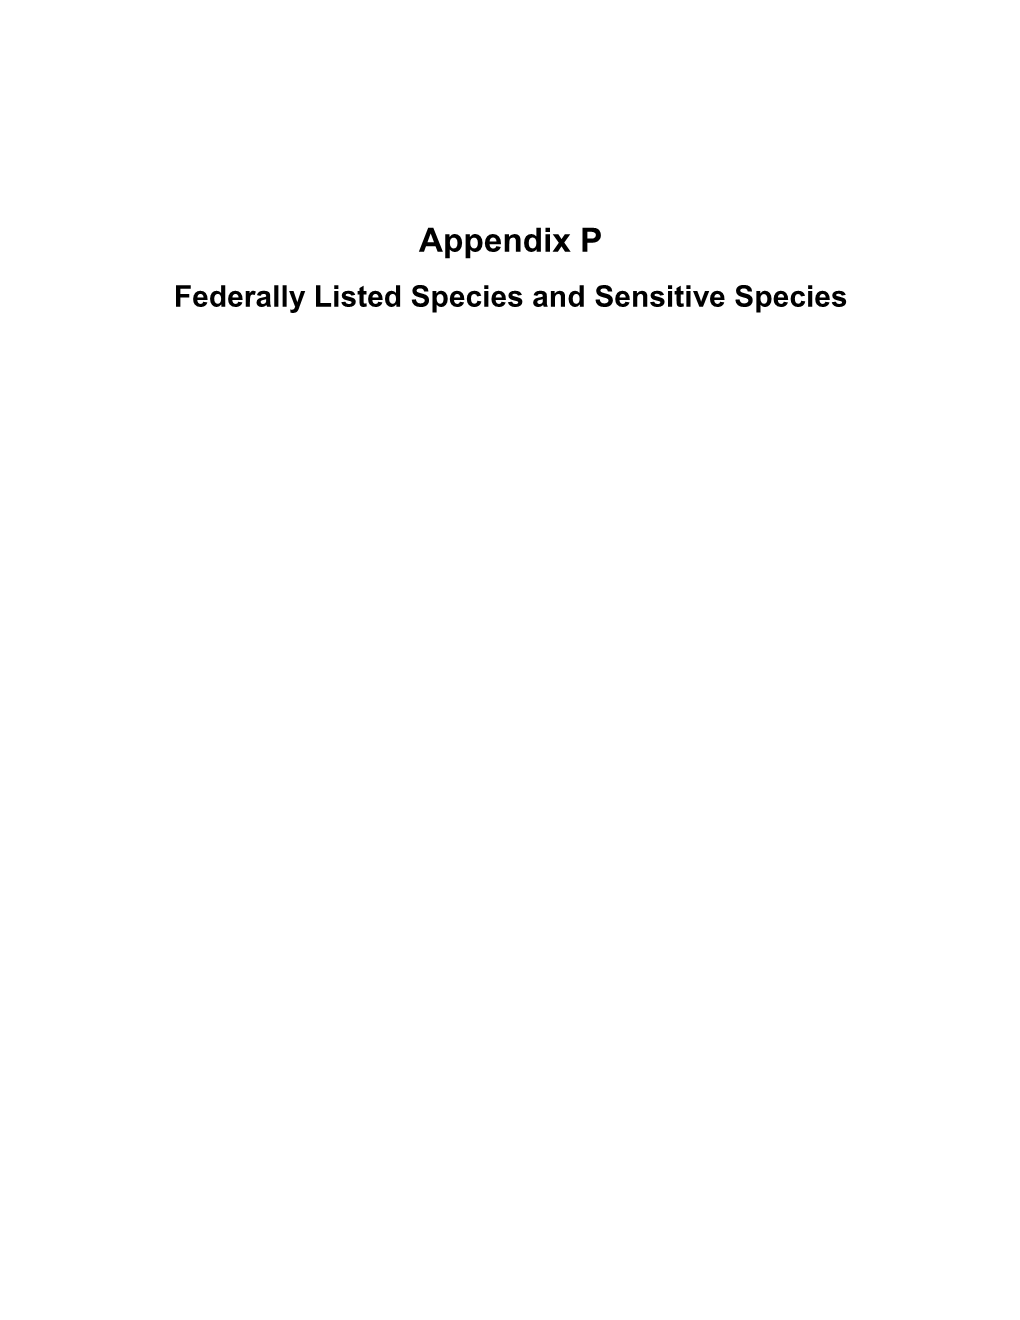 Federally Listed Species and Sensitive Species